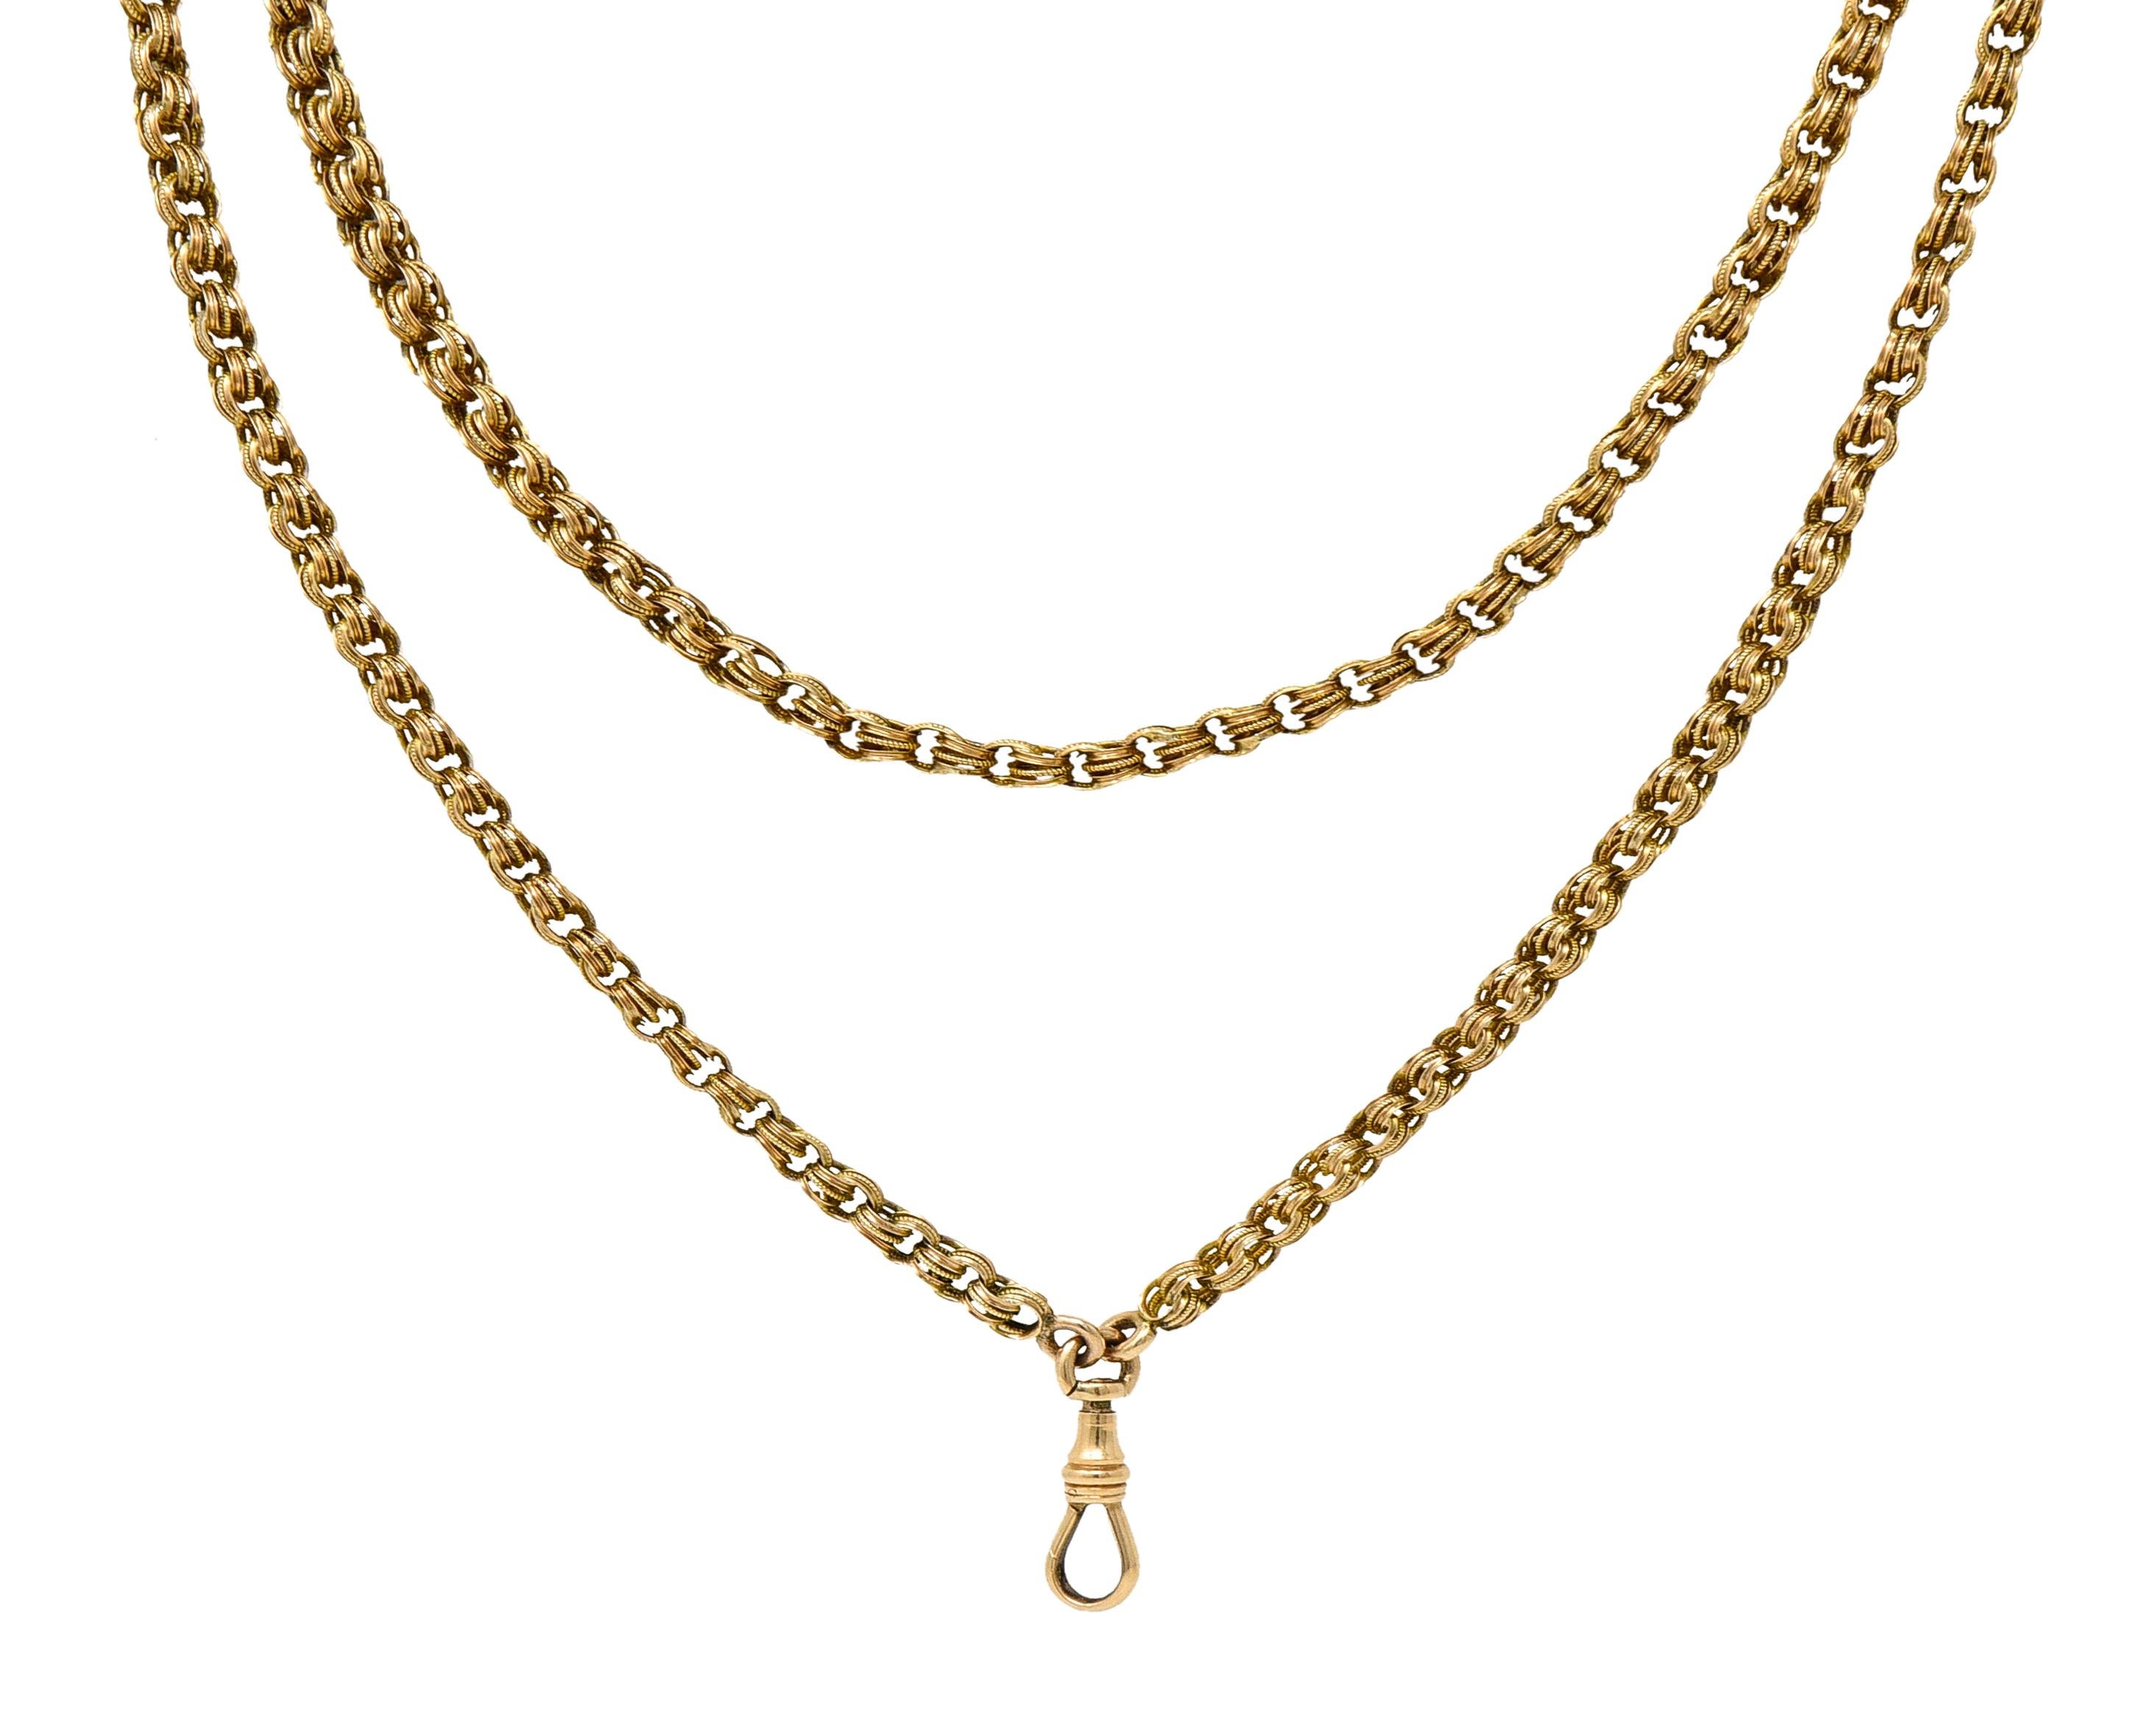 Victorian 14 Karat Yellow Gold Rollo Link Long Antique Fob Chain Necklace For Sale 1